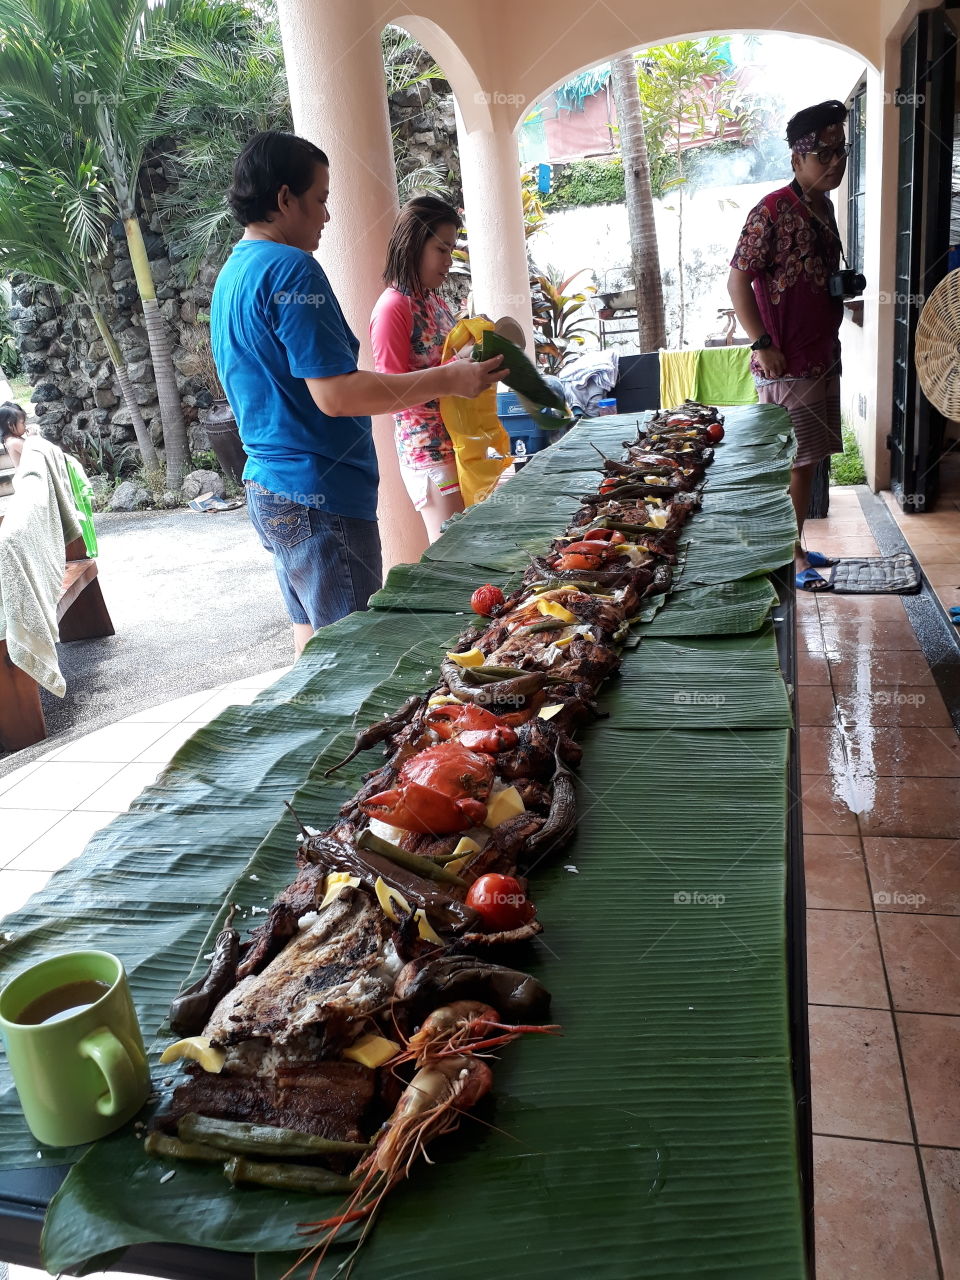 boodle fight only in the philippines with mix foods barbeque veggies seafood top on rice and voila!